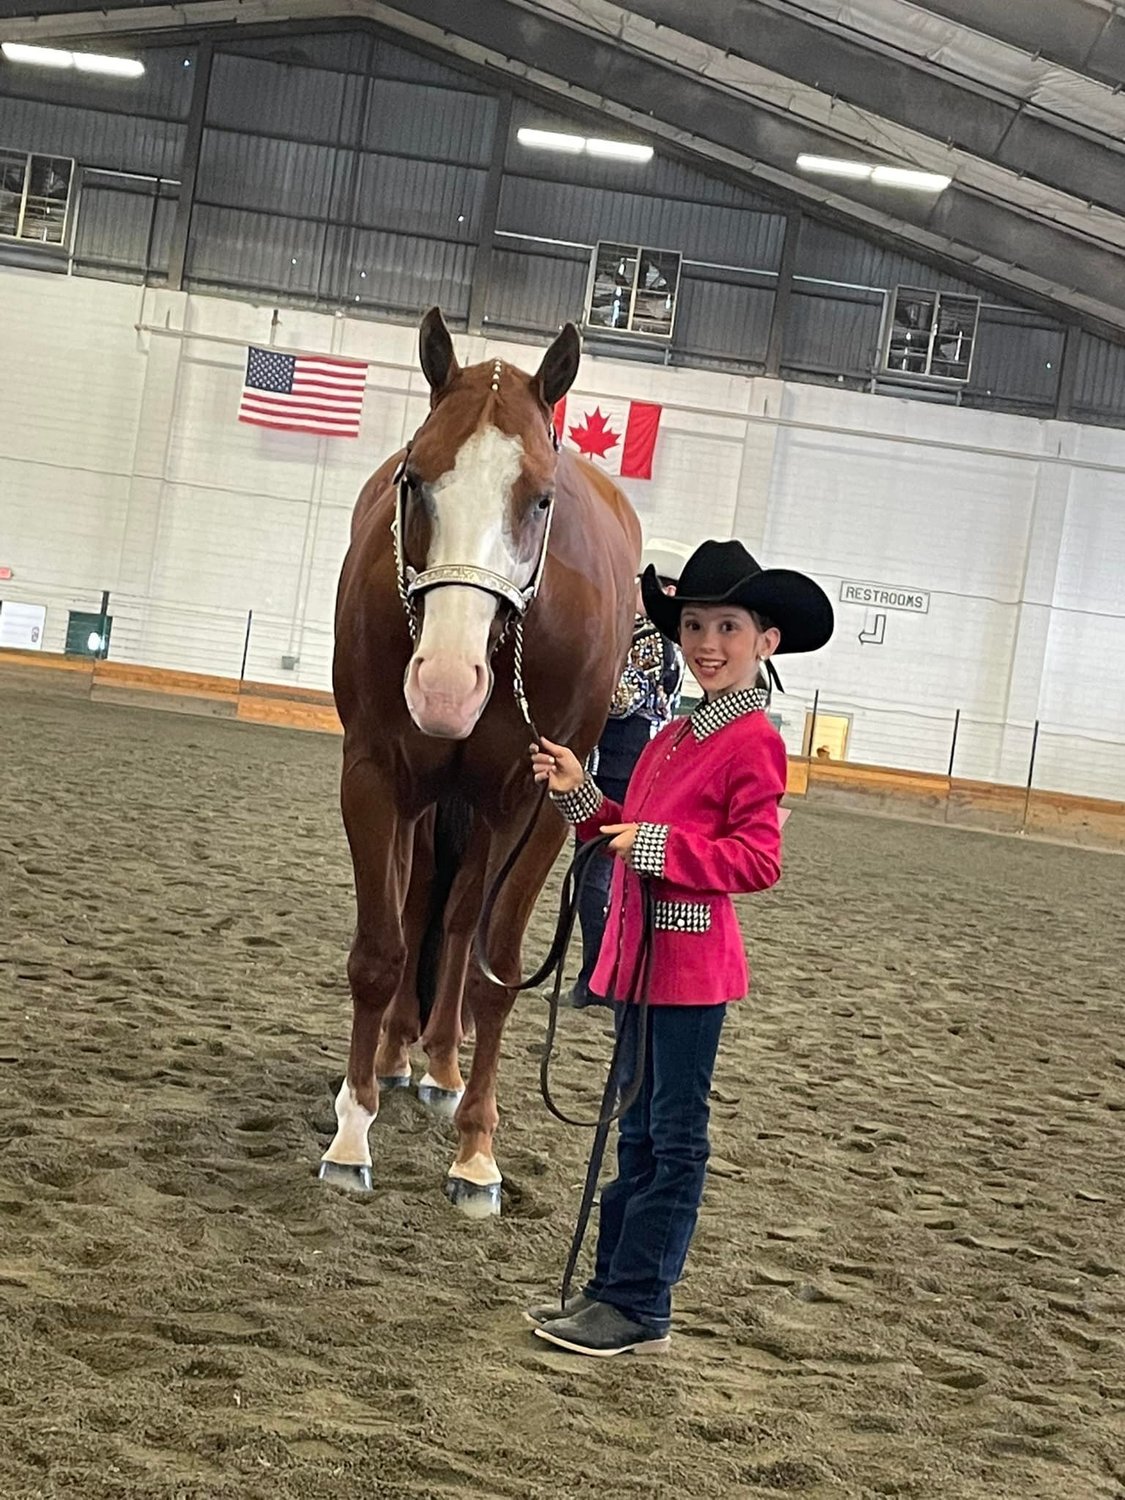 A rider shows off her horse at the Washington State Paint Horse Club show in July.